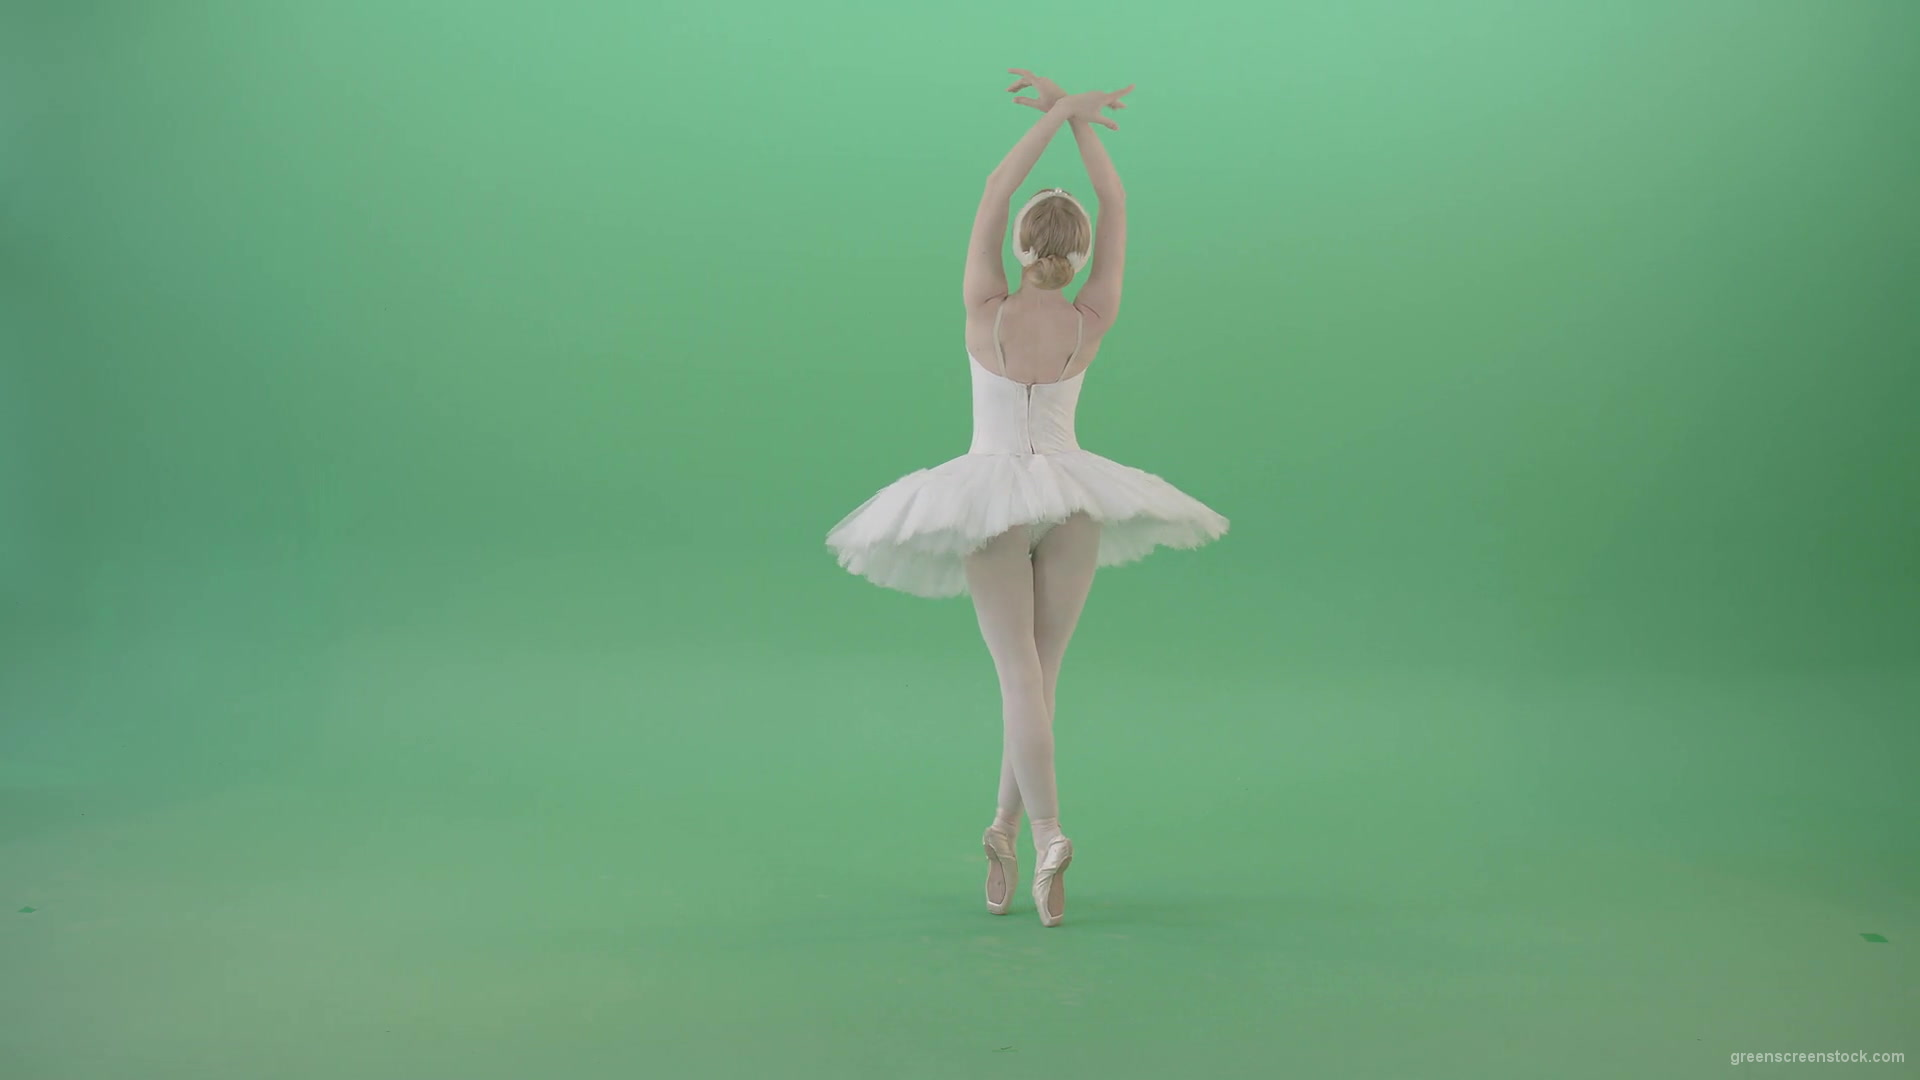 Back-side-view-ballet-dancing-tiny-girl-performs-in-green-screen-studio-4K-Video-Footage-1920_009 Green Screen Stock